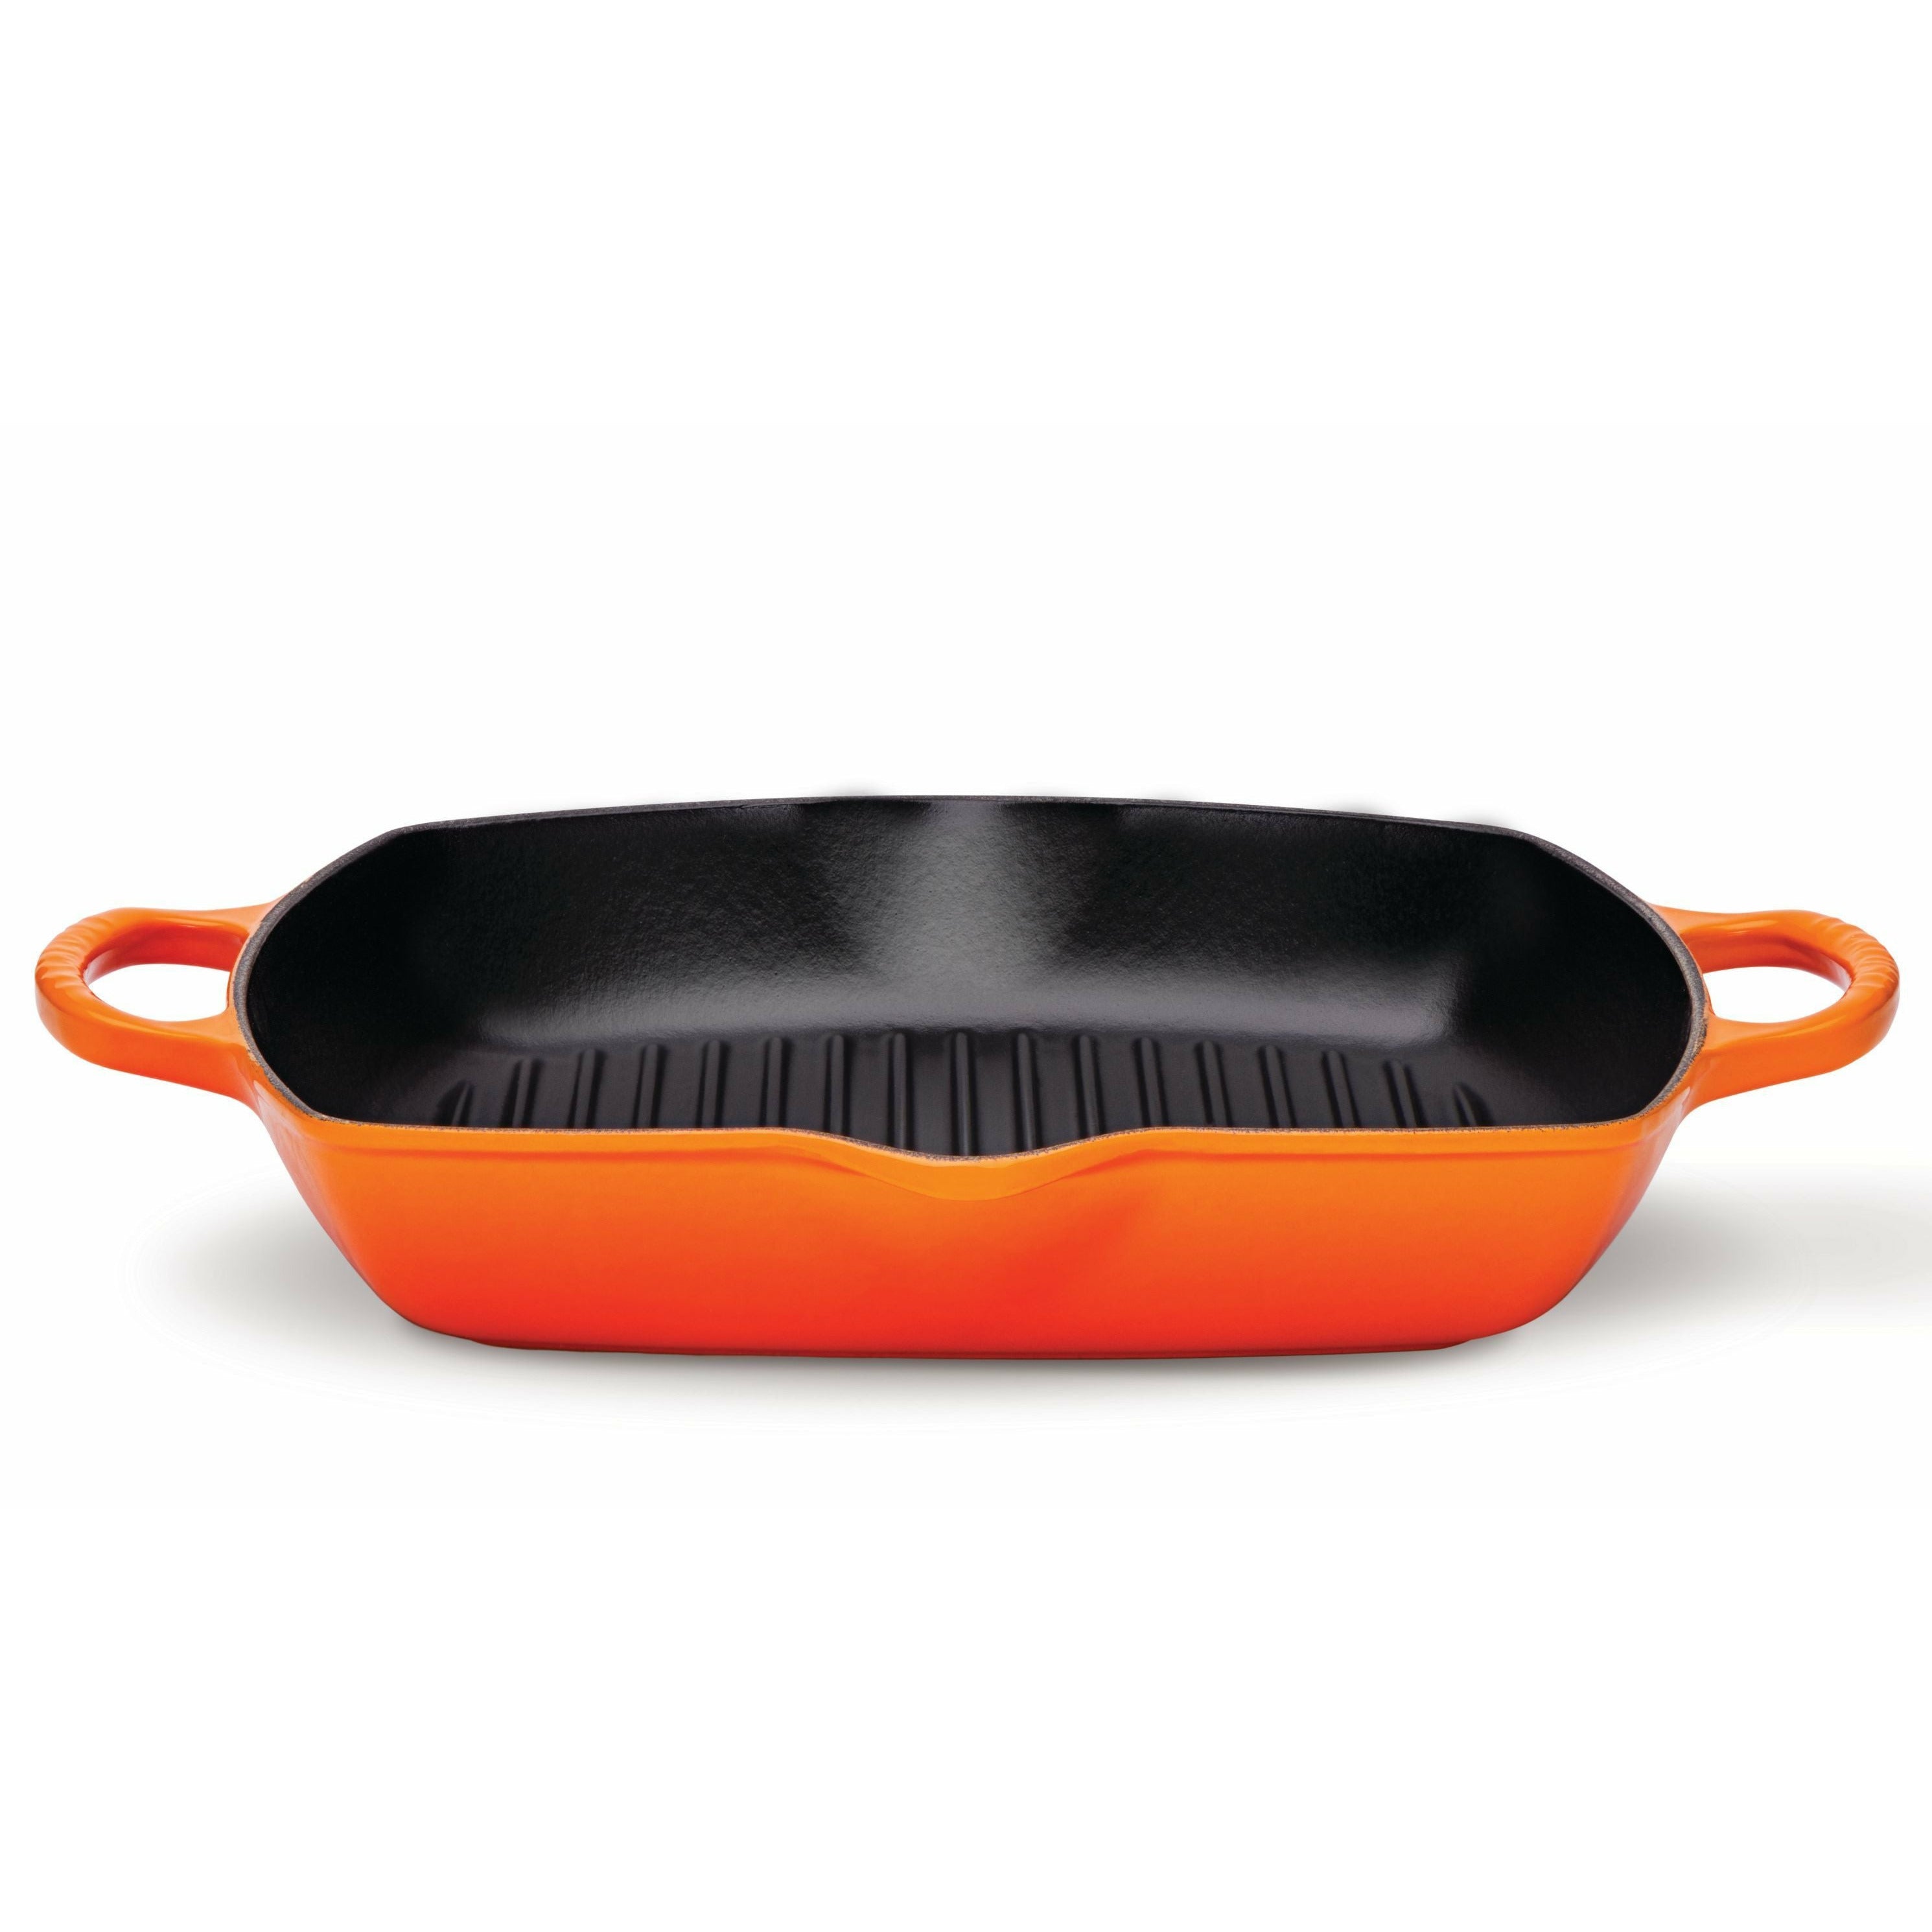 Le Creuset Nature High Square Grill Pan 30厘米，烤箱红色